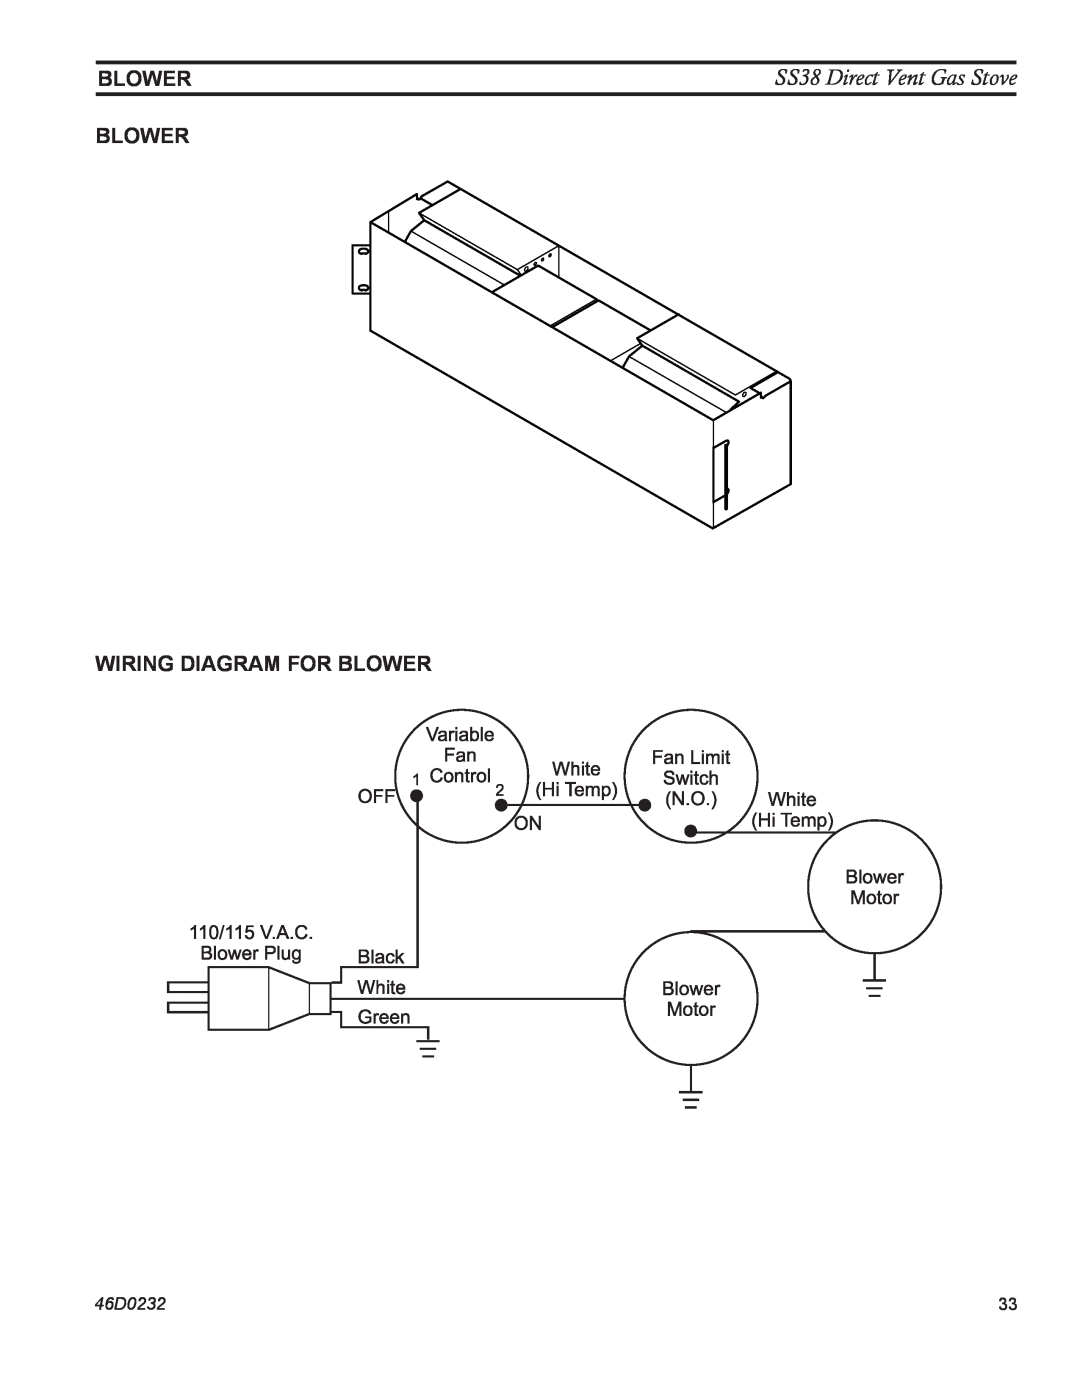 Monessen Hearth blower, Blower wiring diagram for Blower, SS38 Direct Vent Gas Stove, White Hi Temp, 46D0232 